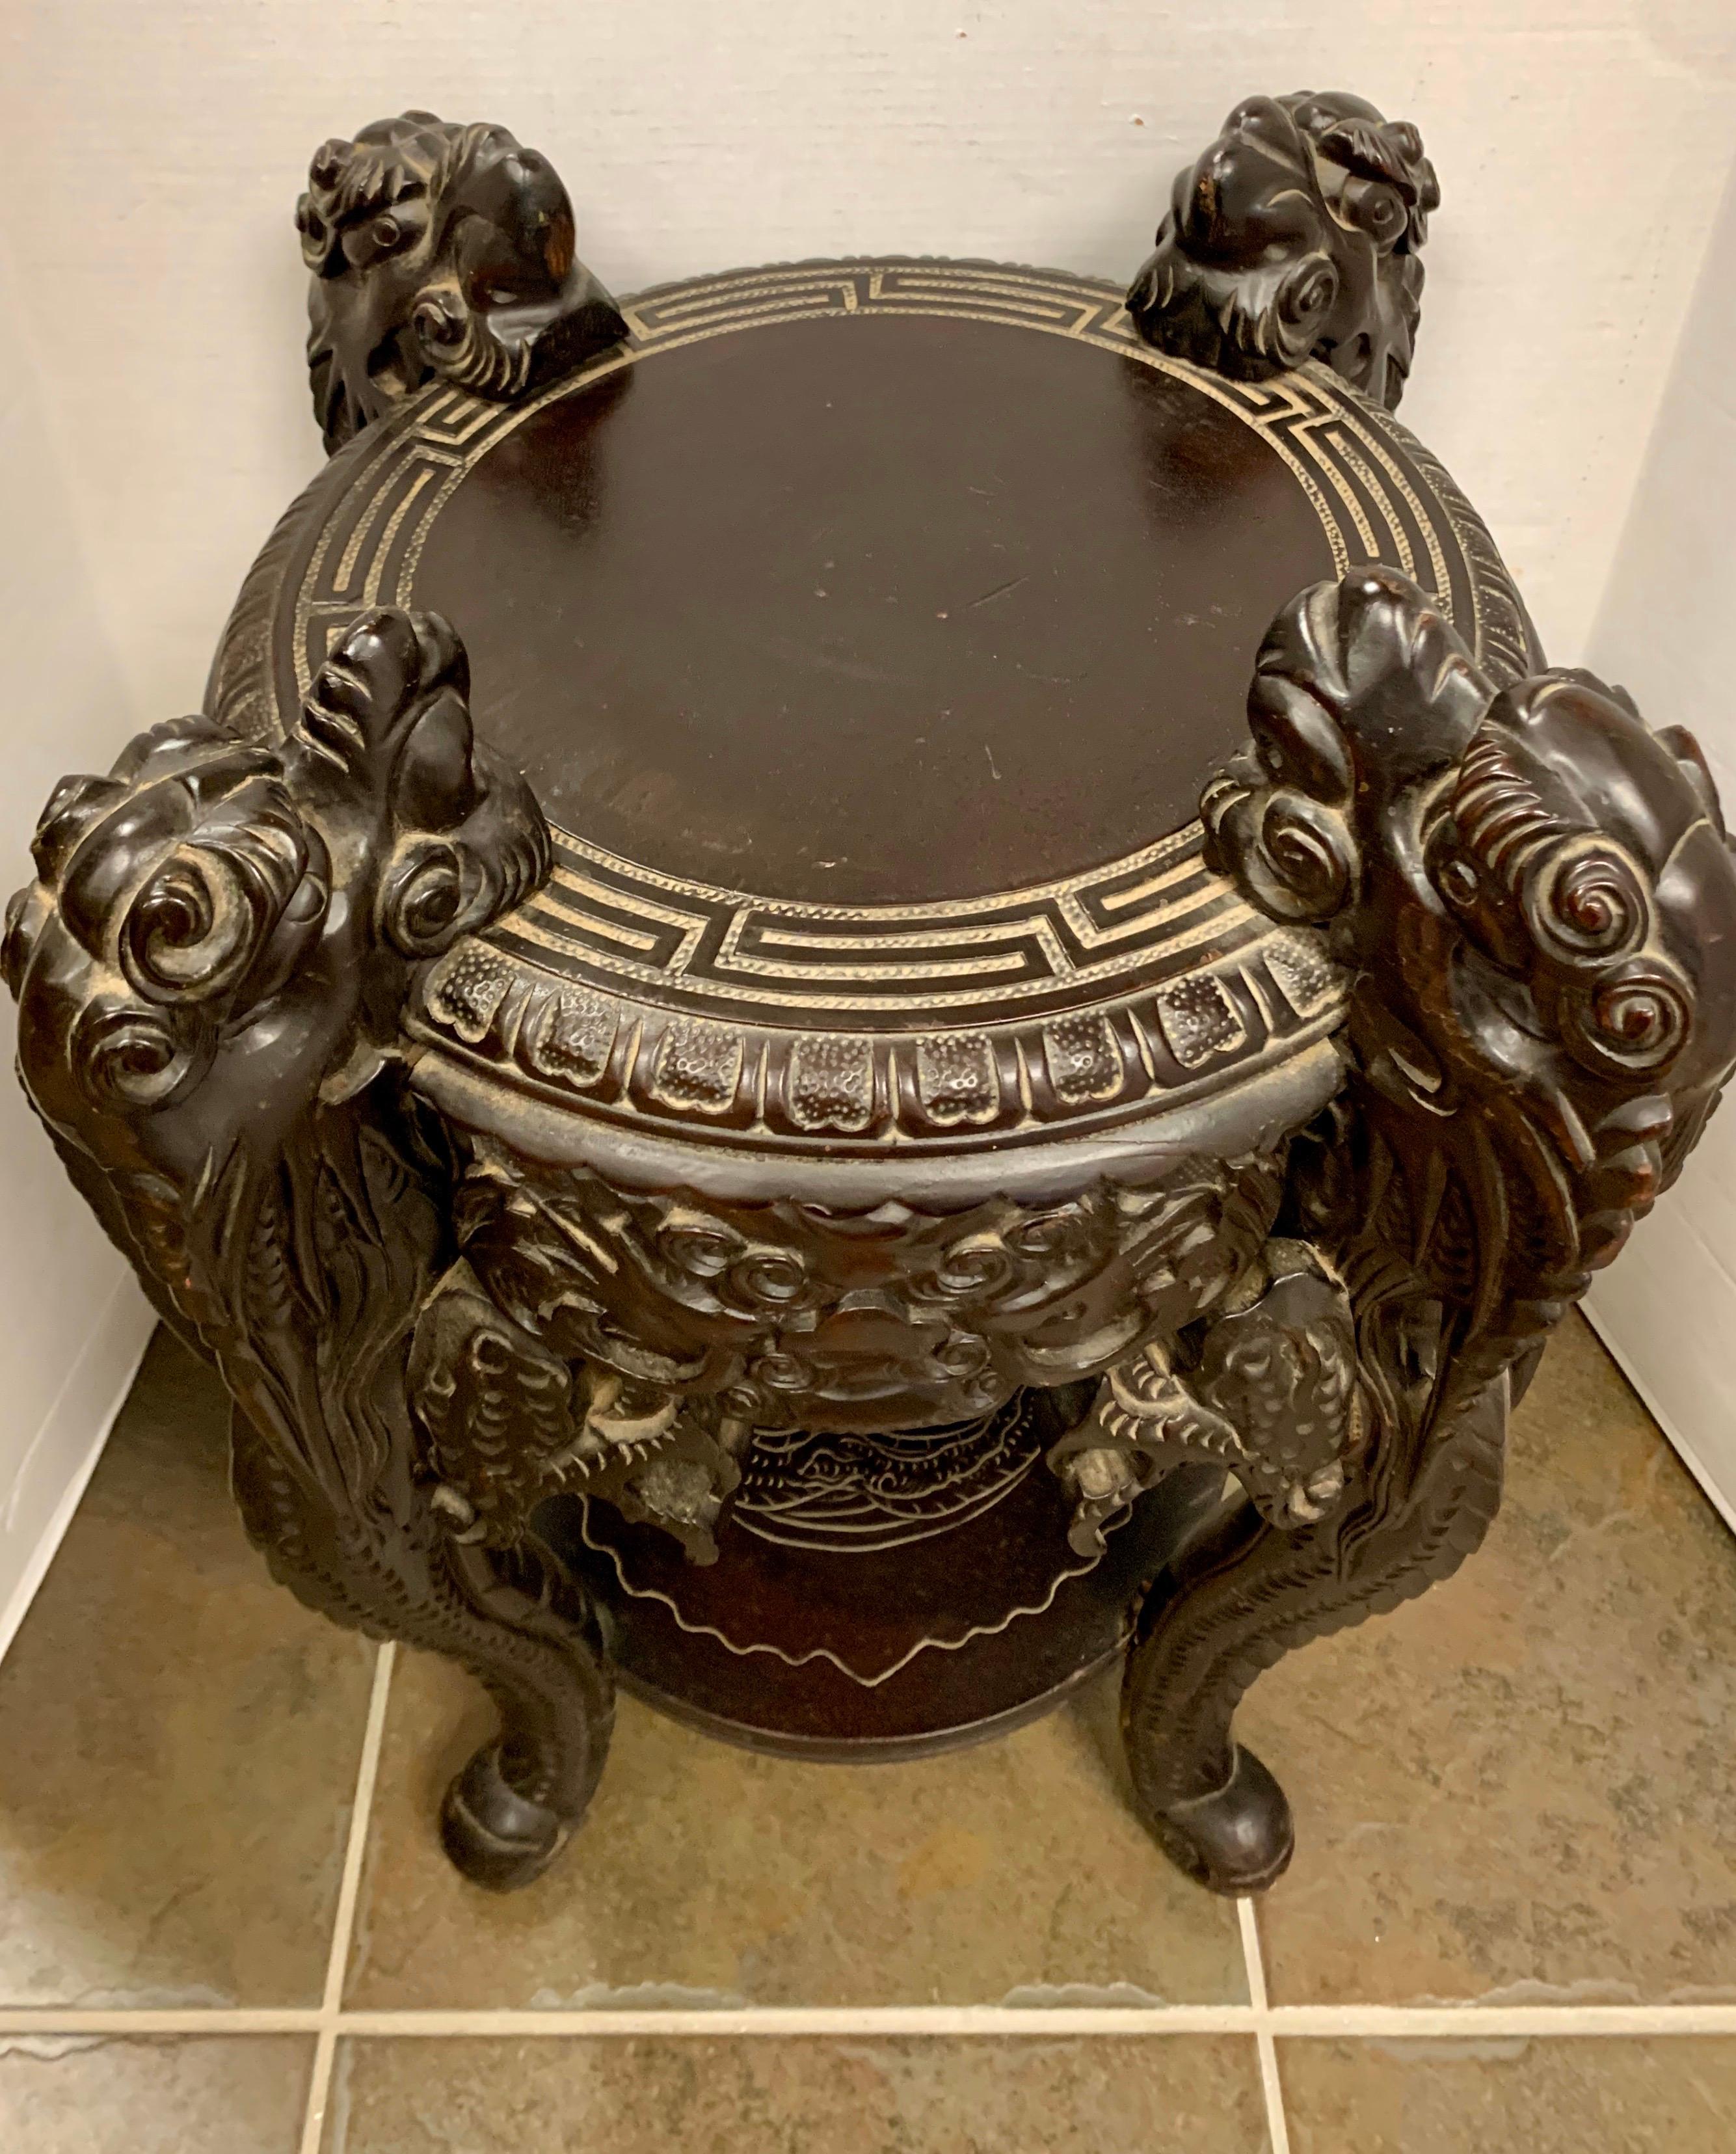 Highly carved round Chinese table supported by four carved dragons. Bottom shelf is engraved with a dragon motif. Top has a carved Greek key border.